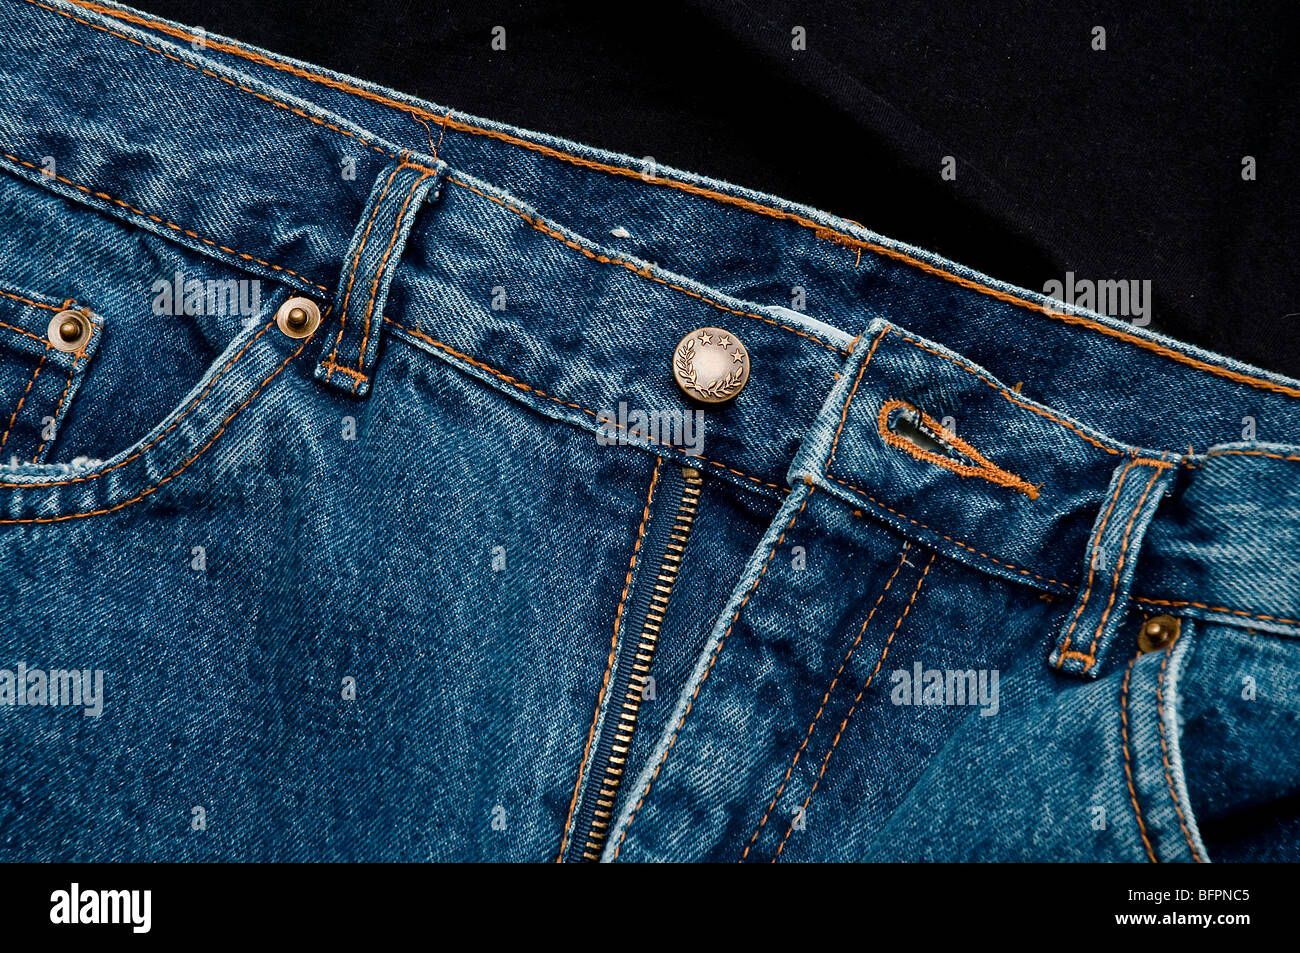 A pair of jeans pants Stock Photo